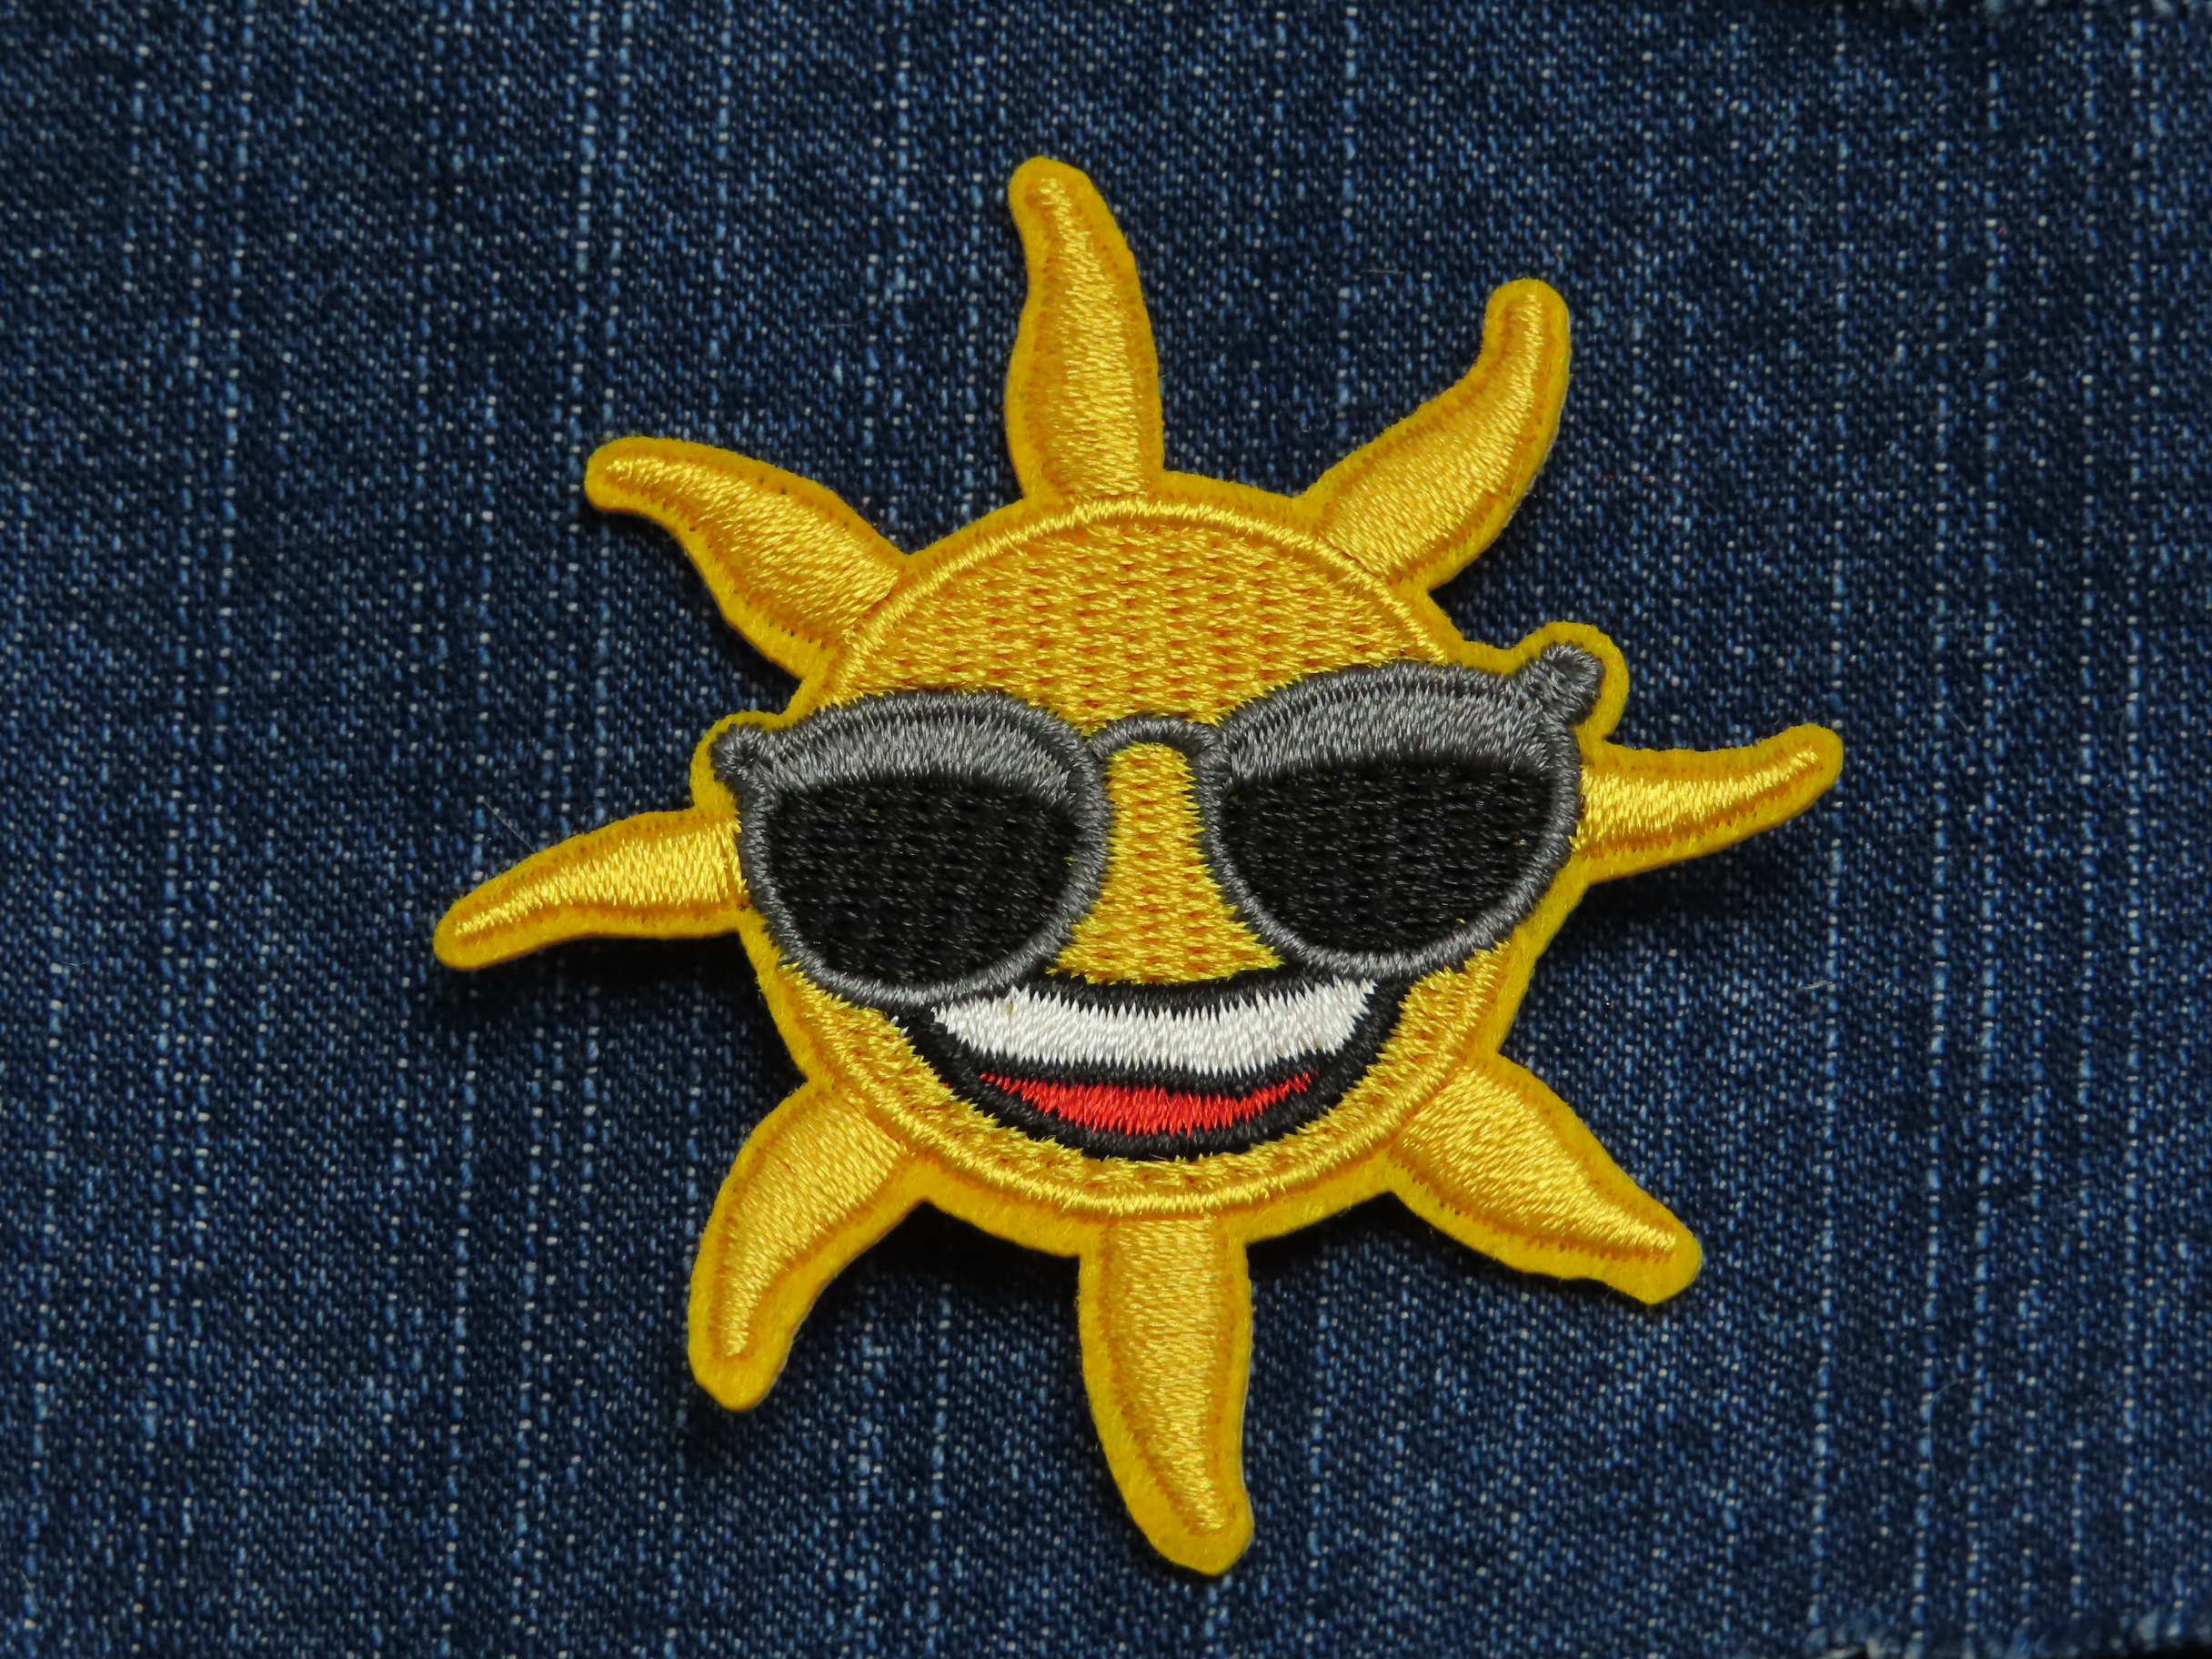 Smiling Sun Iron On Embroidered Patch Applique